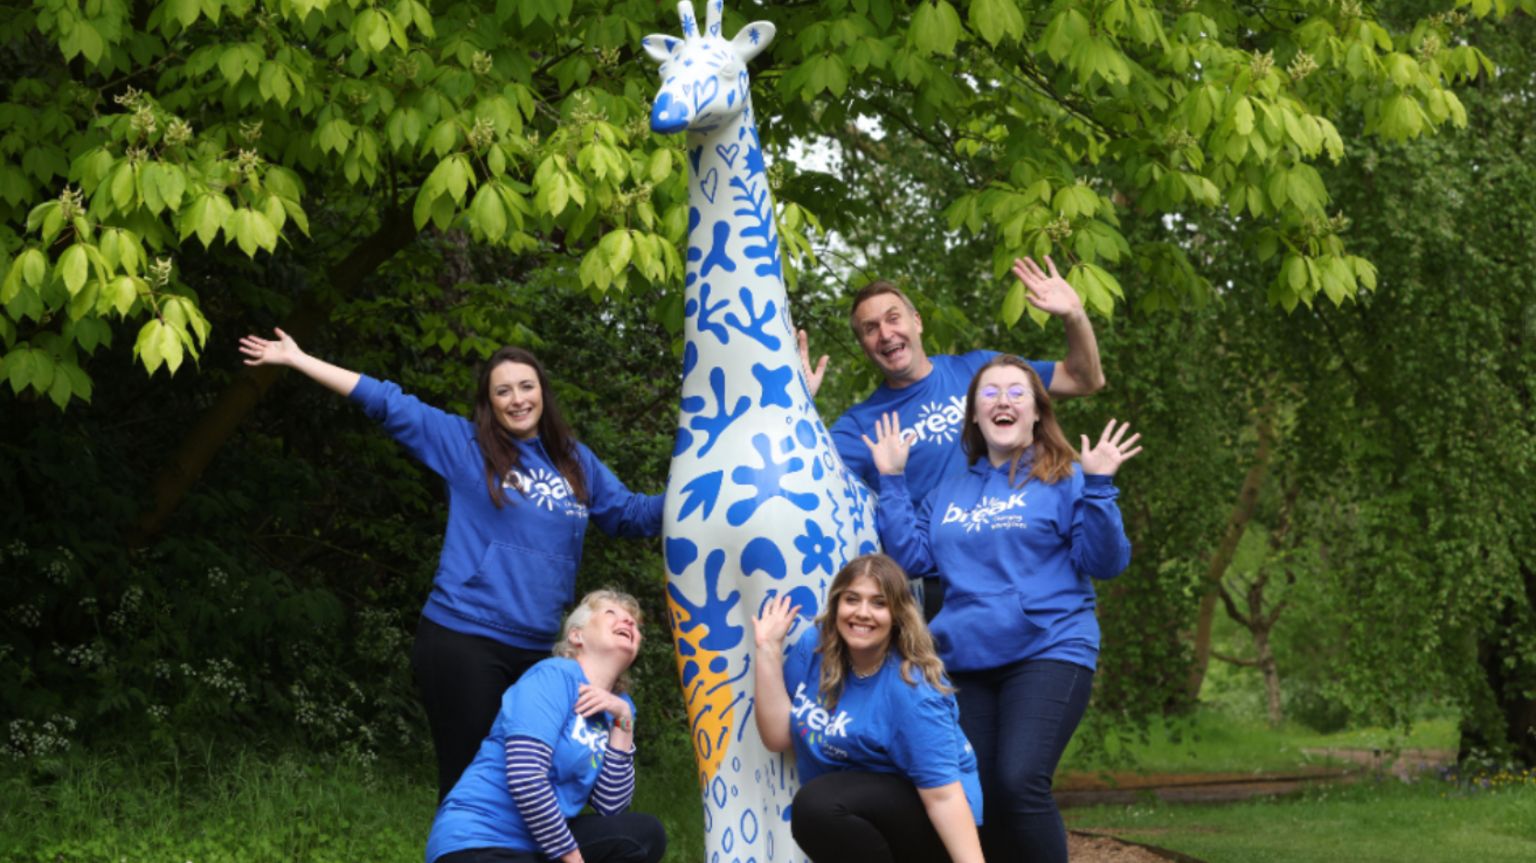 A group of Break supporters and one of the giraffes